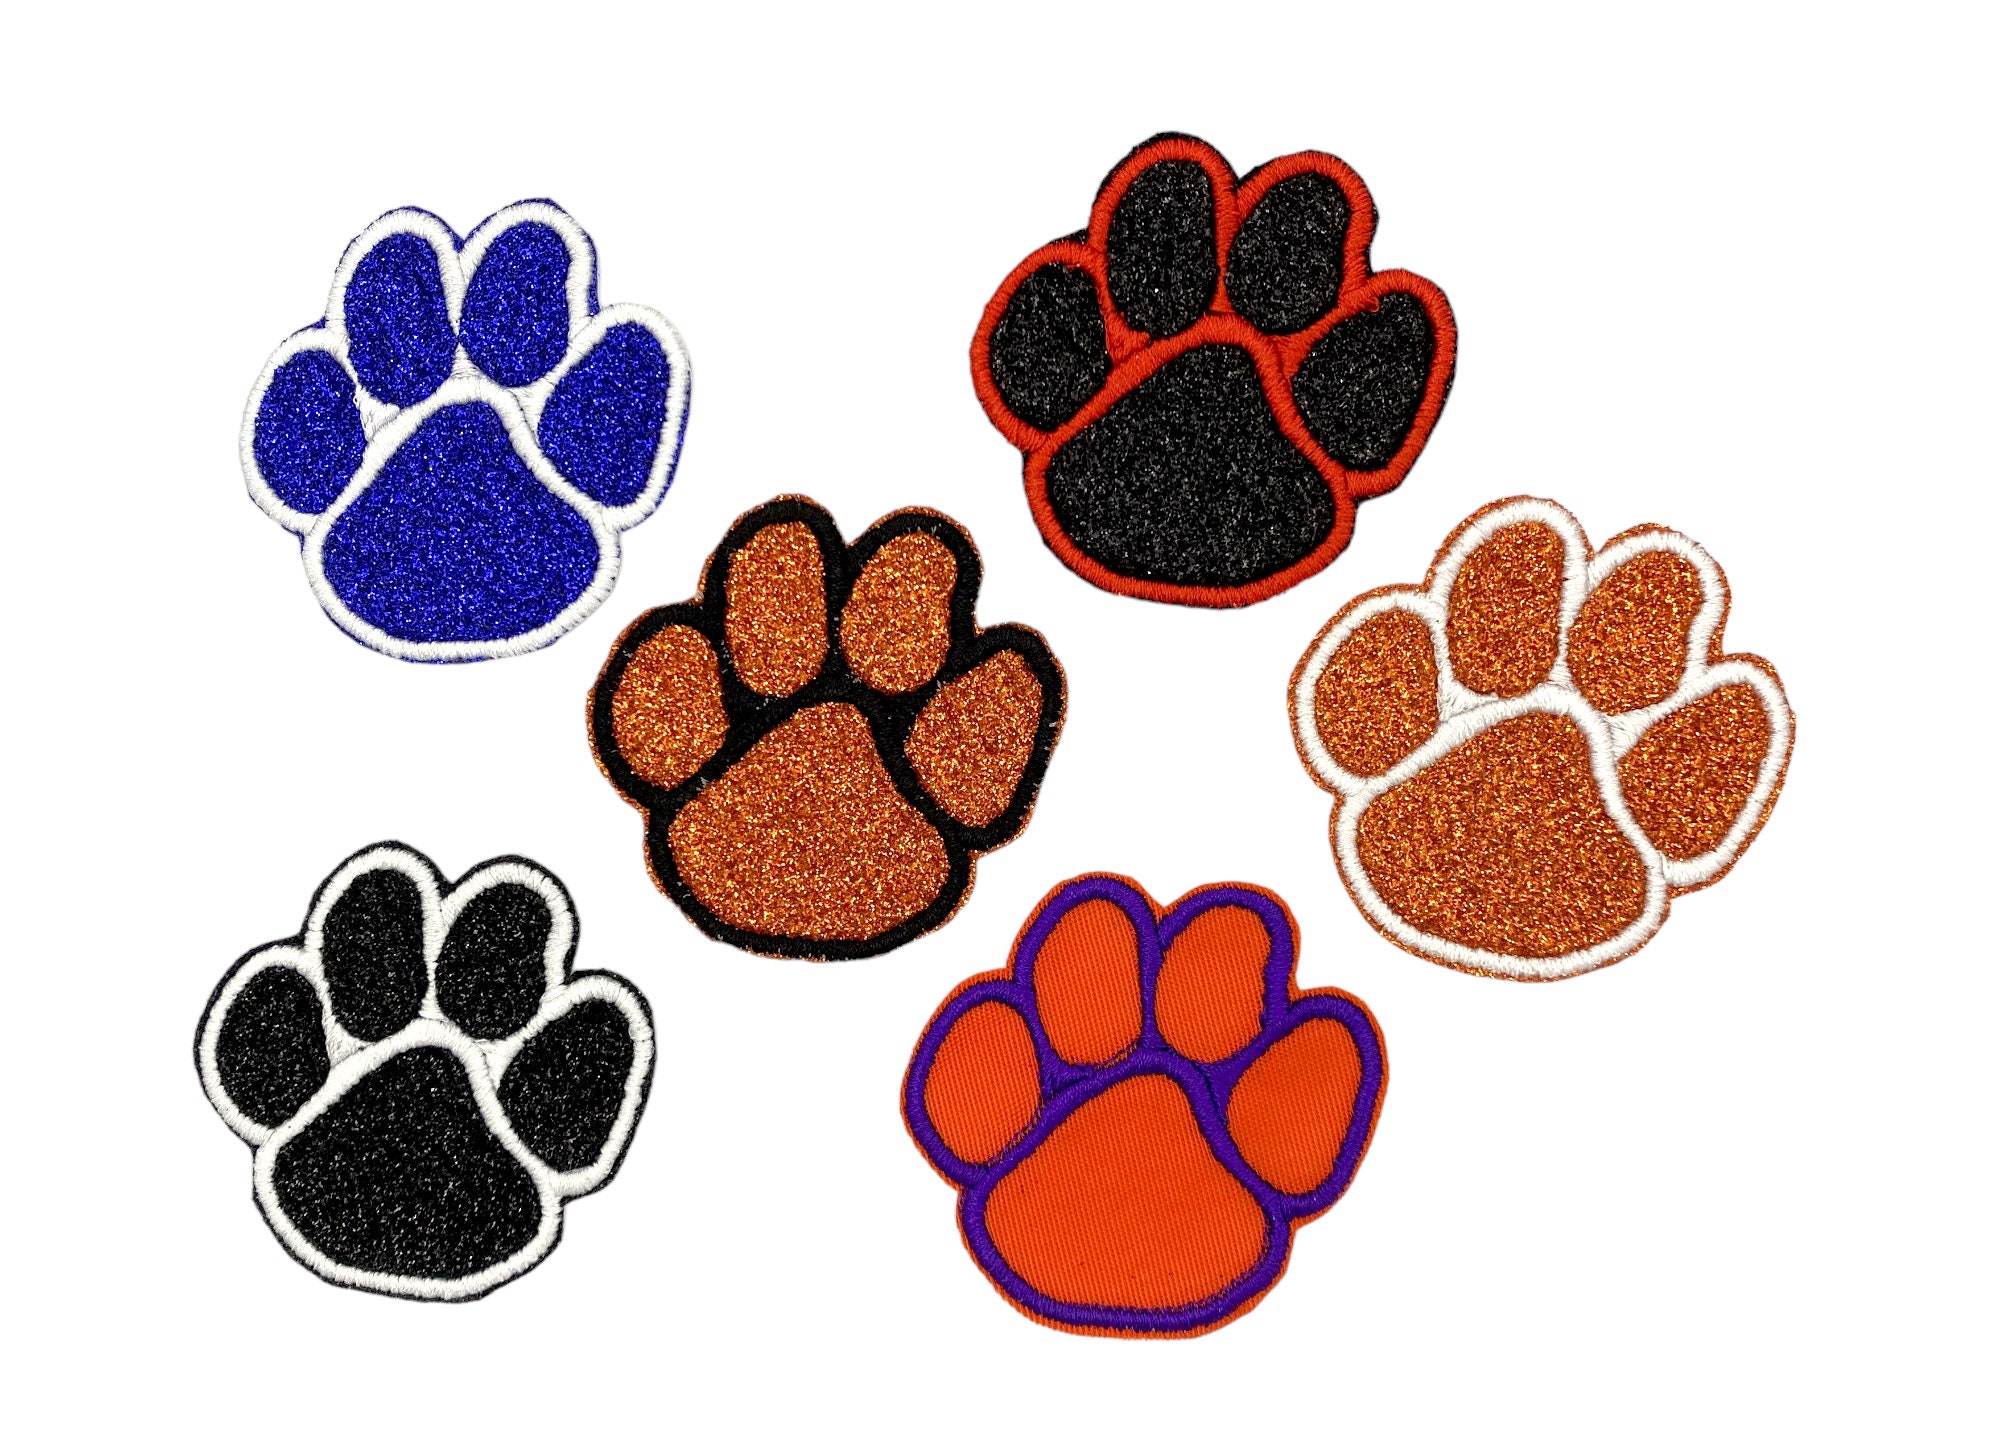 PAW PET F.A.K. Patch Name Tape Name Tag K9 Dog Rescue Dog Pet Embroidered  Sew on or Hook Backing Size 4x1, 5x1,6x1 